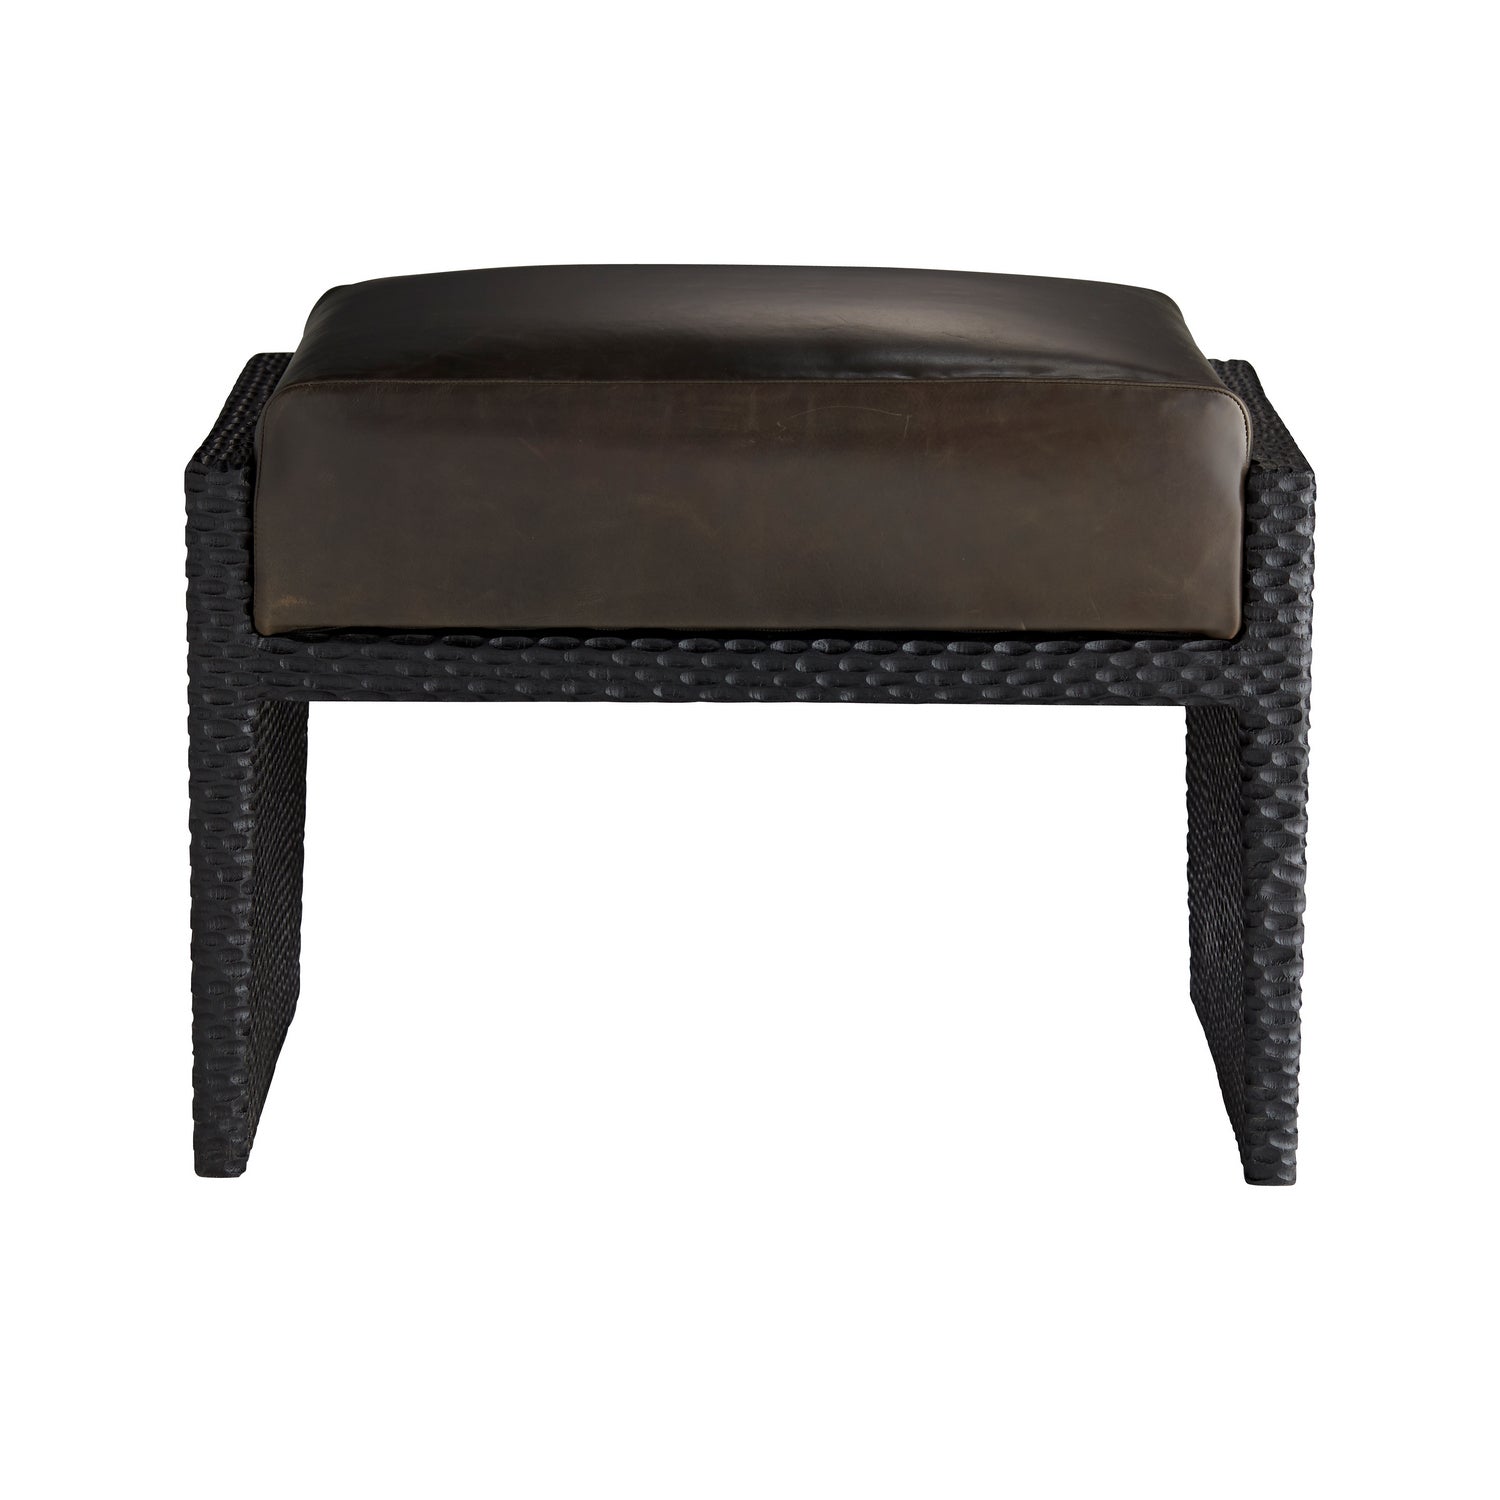 Ottoman from the Isaiah collection in Graphite finish